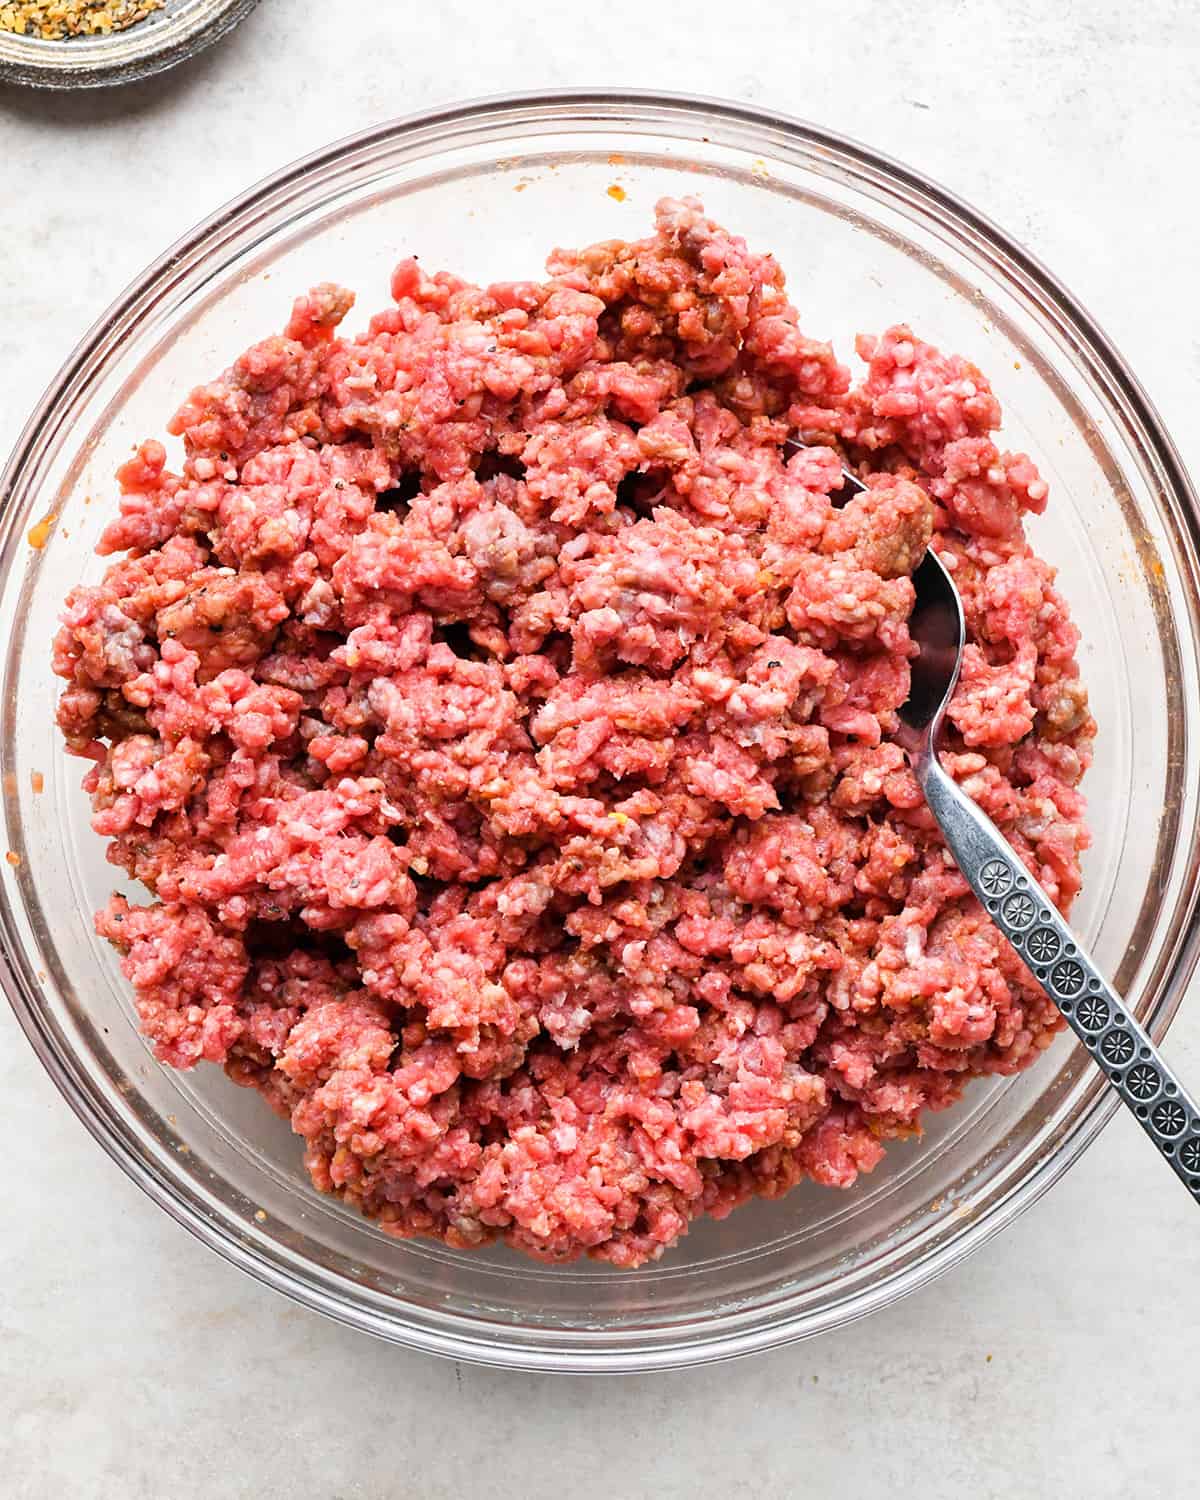 a  photo showing How to Make Hamburger Patties - ingredients combined in a bowl